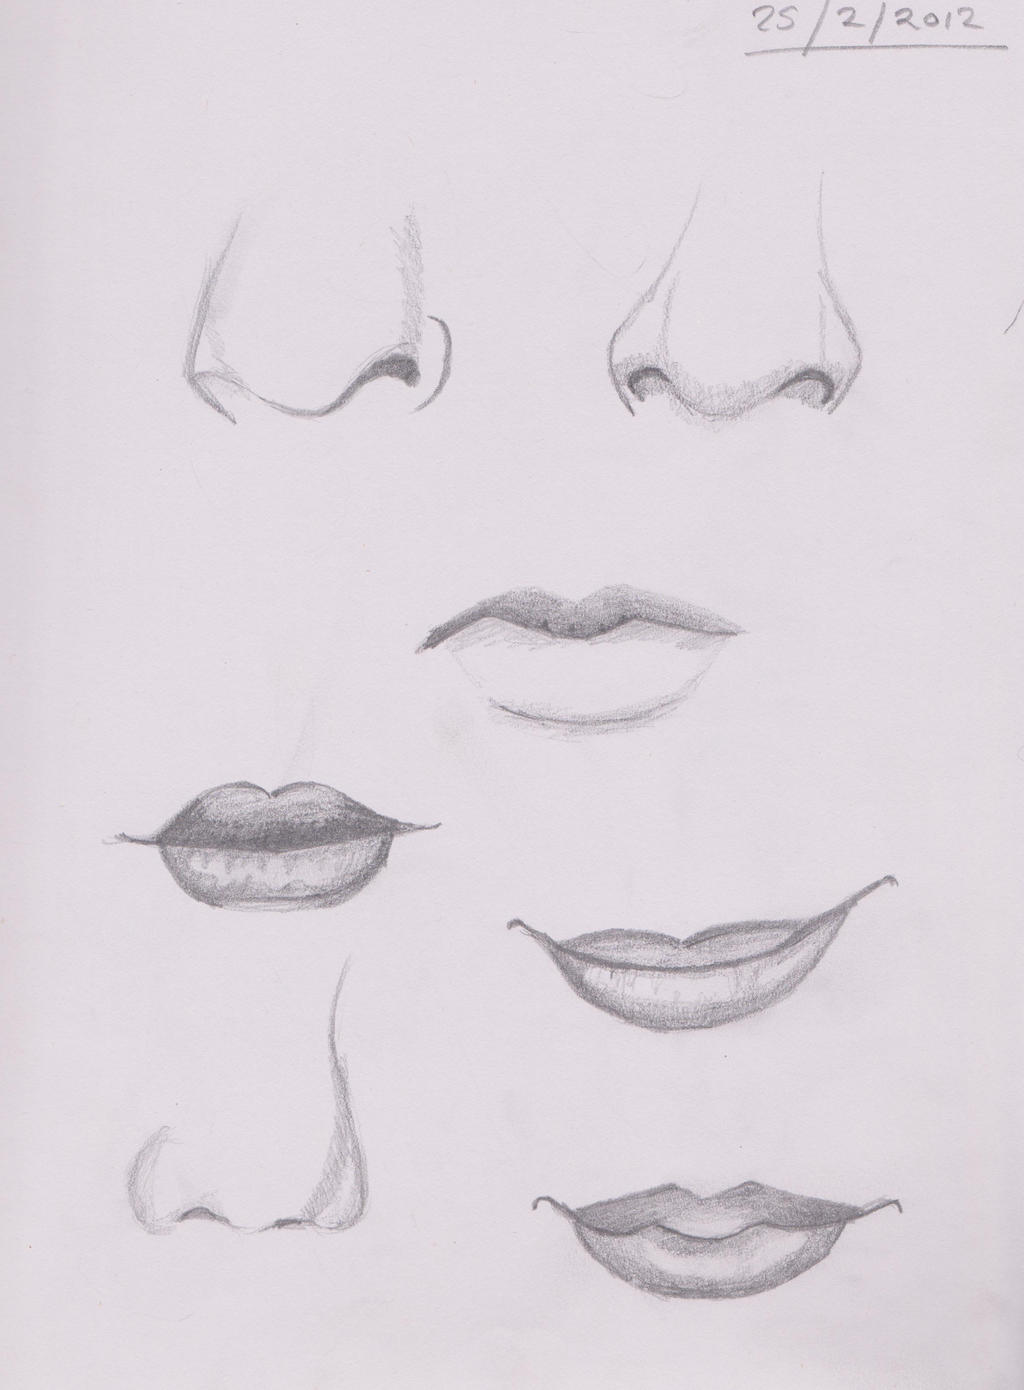 Nose and mouth sketches by CrazyMD2 on DeviantArt